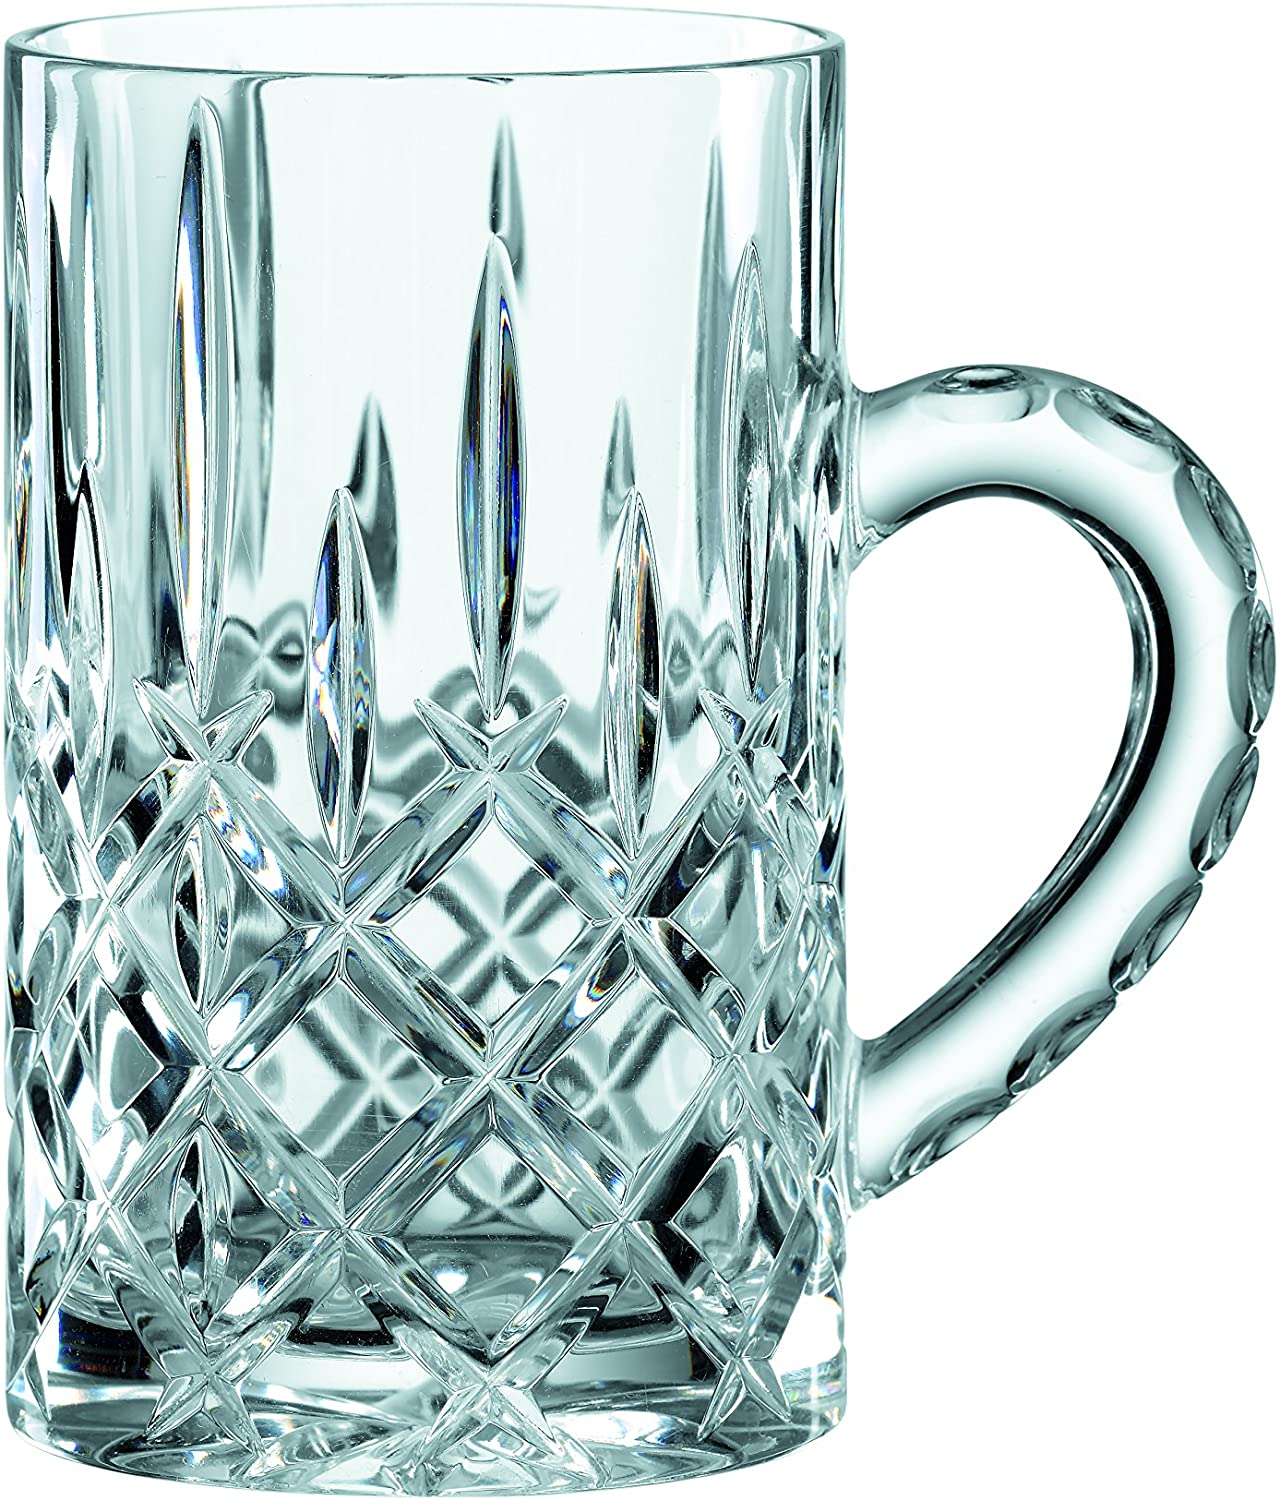 Spiegelau & Nachtmann Noblesse Collection Crystal Glass, clear, 250 ml